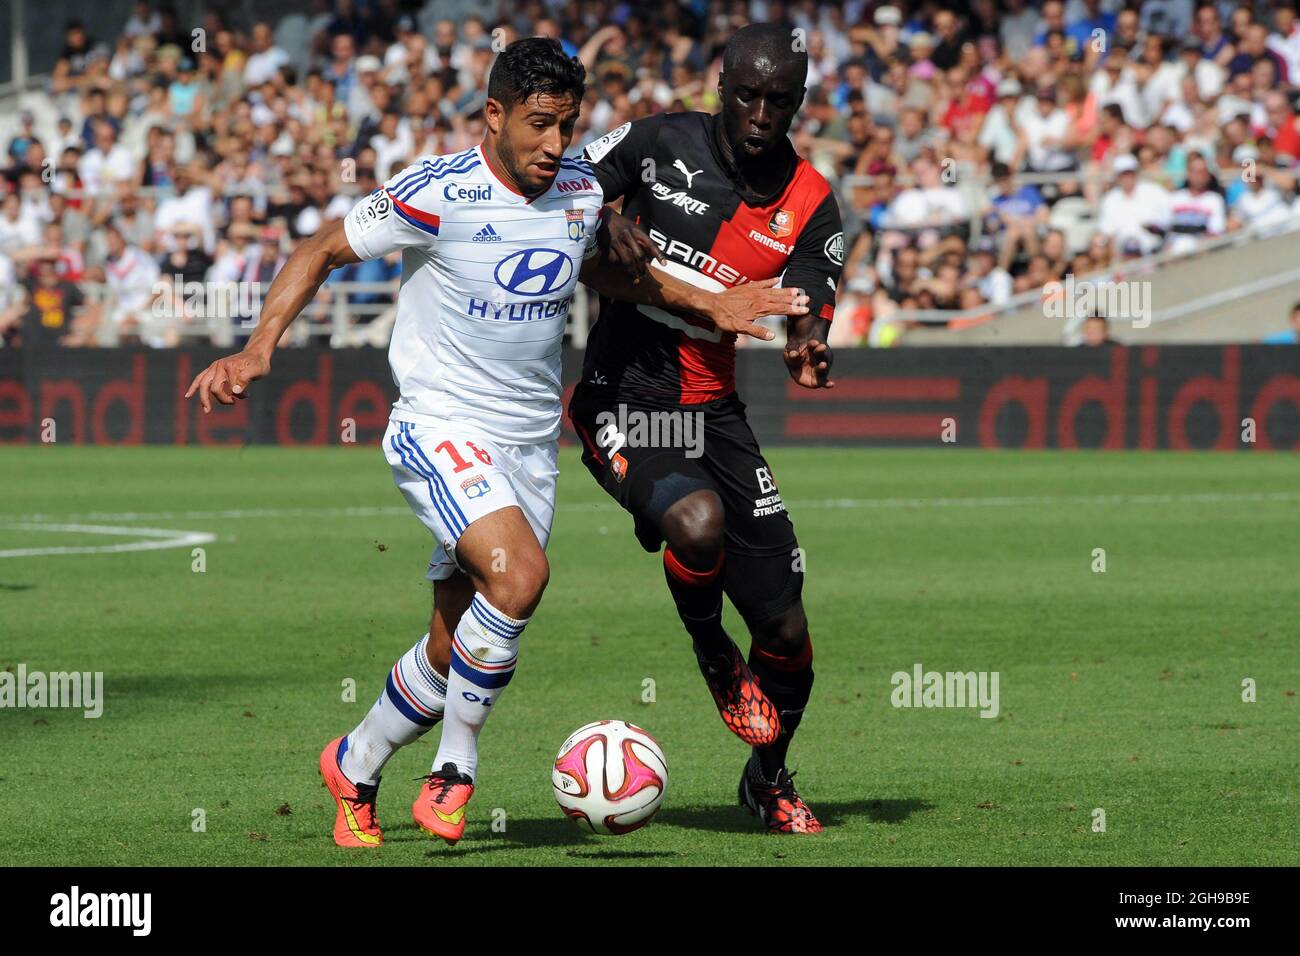 Nabil Fekir andCheikh M'Bengue in action during the French Ligue 1 soccer match between Stade Rennais F.C and Olympique Lyonnais at Stade Gerland stadium in France on August 10, 2014. Photo : Jean Paul Thomas  Icon Sport Stock Photo